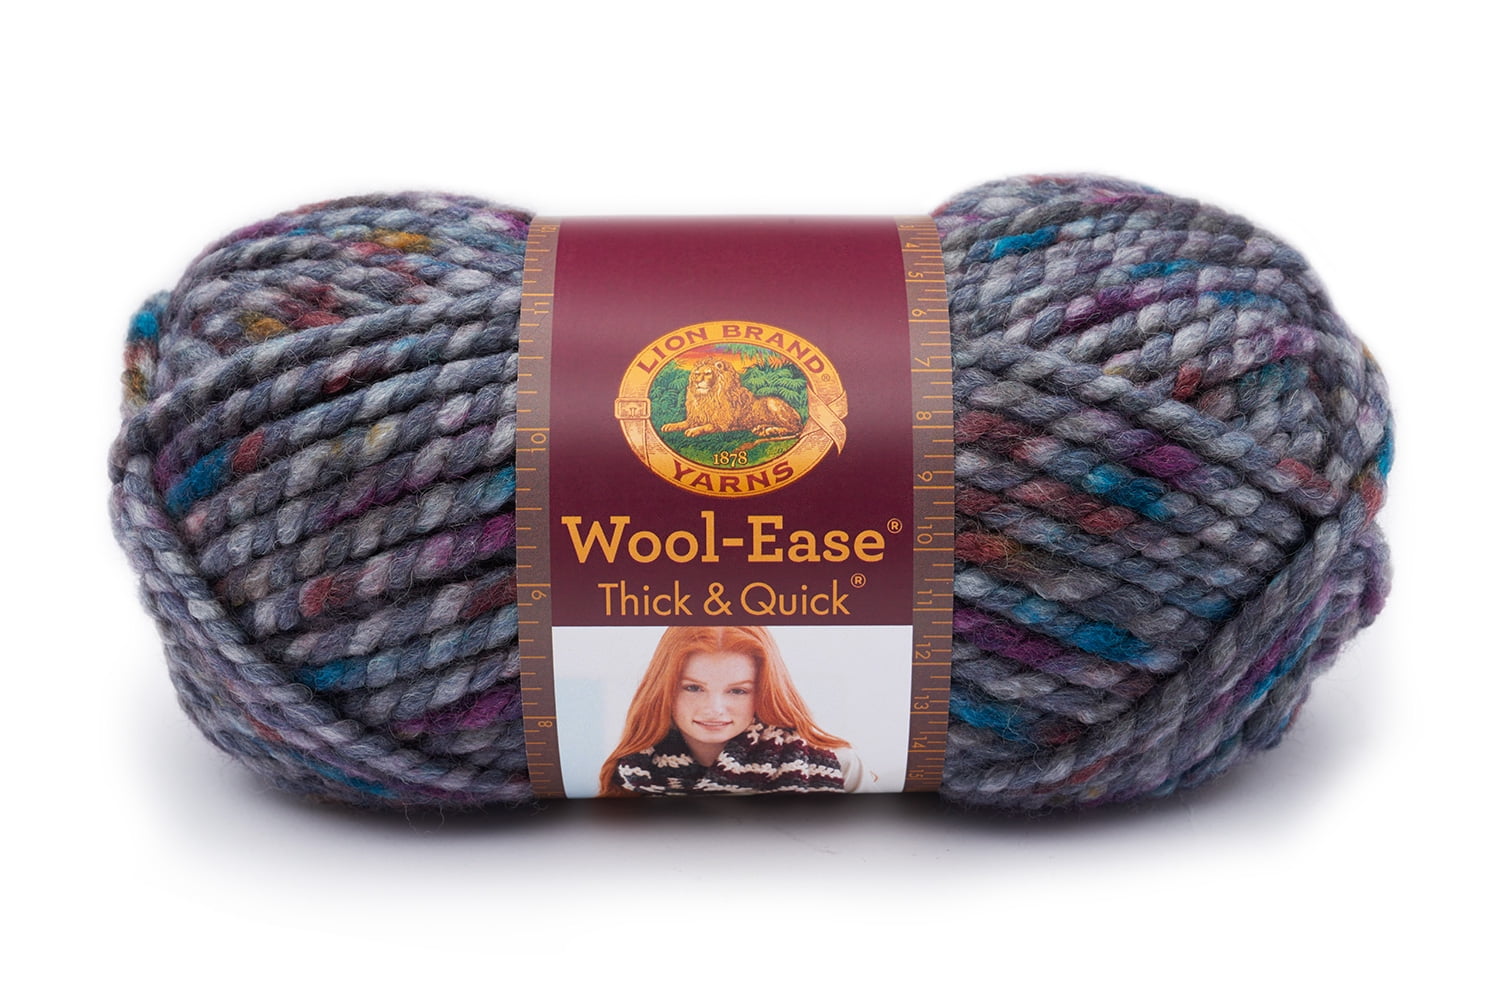 Lion Brand Wool-Ease Thick & Quick Yarn-Glacier, 1 count - Jay C